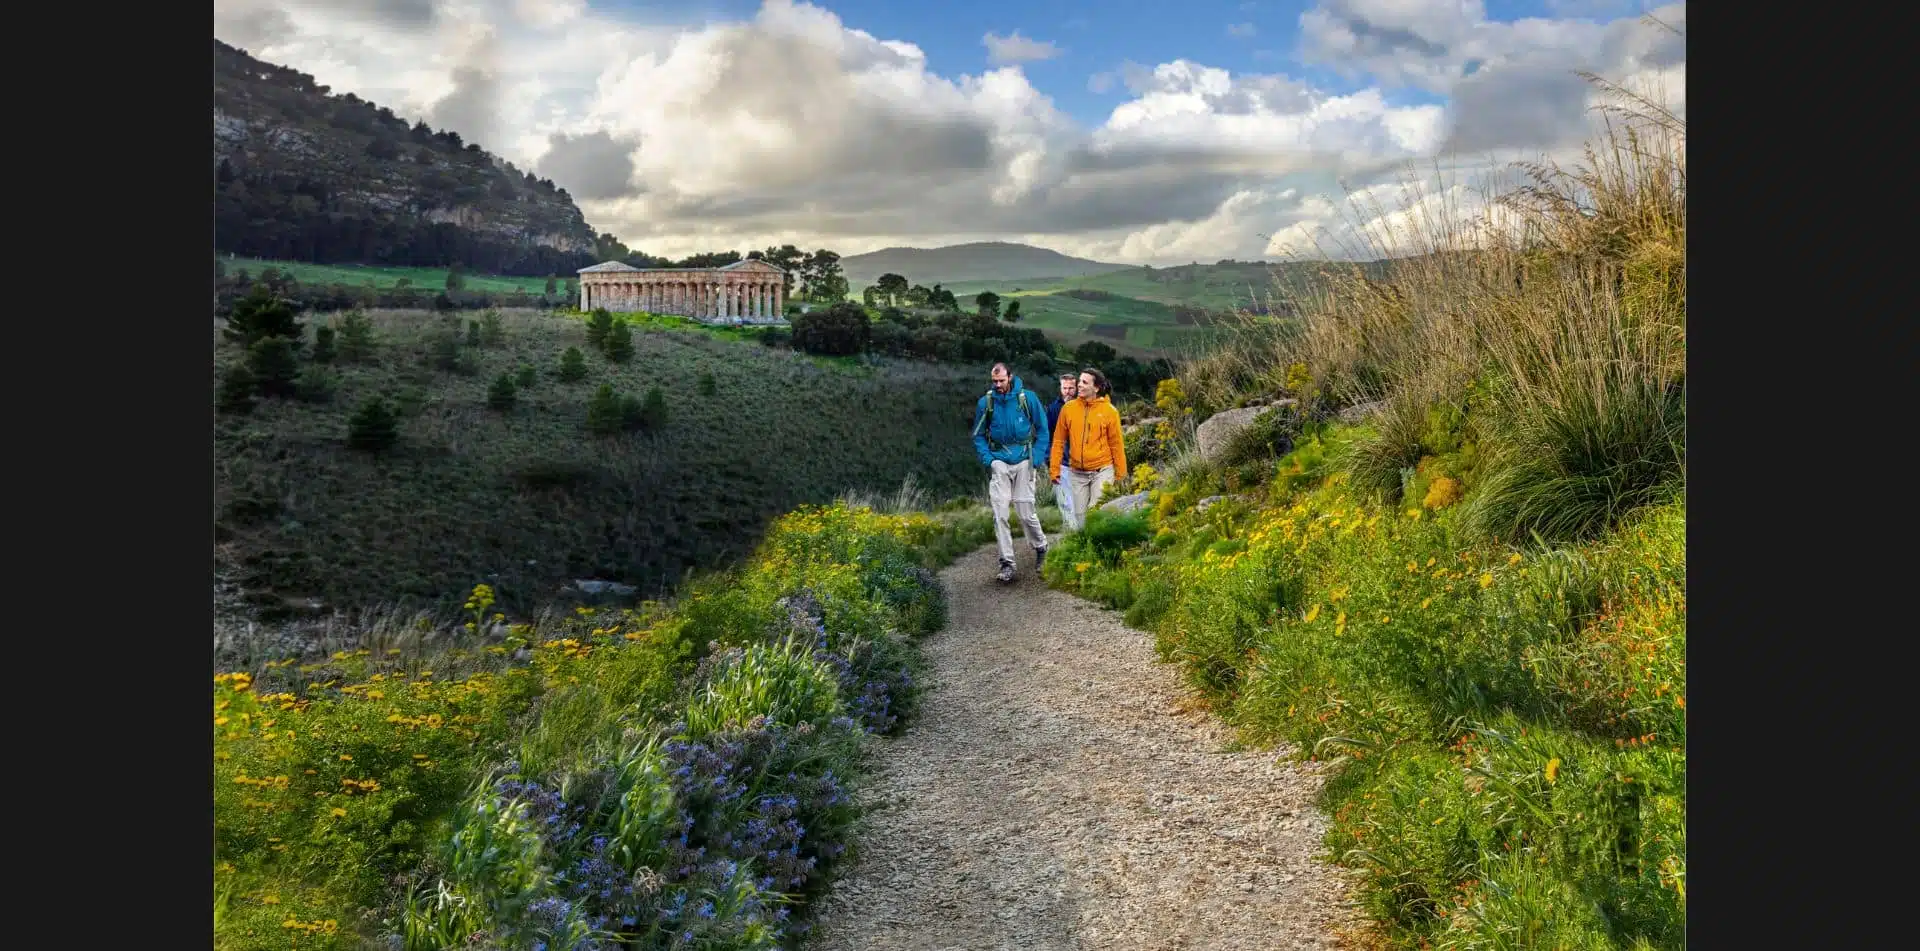 Stroll along scenic footpaths in Sicily, Italy 